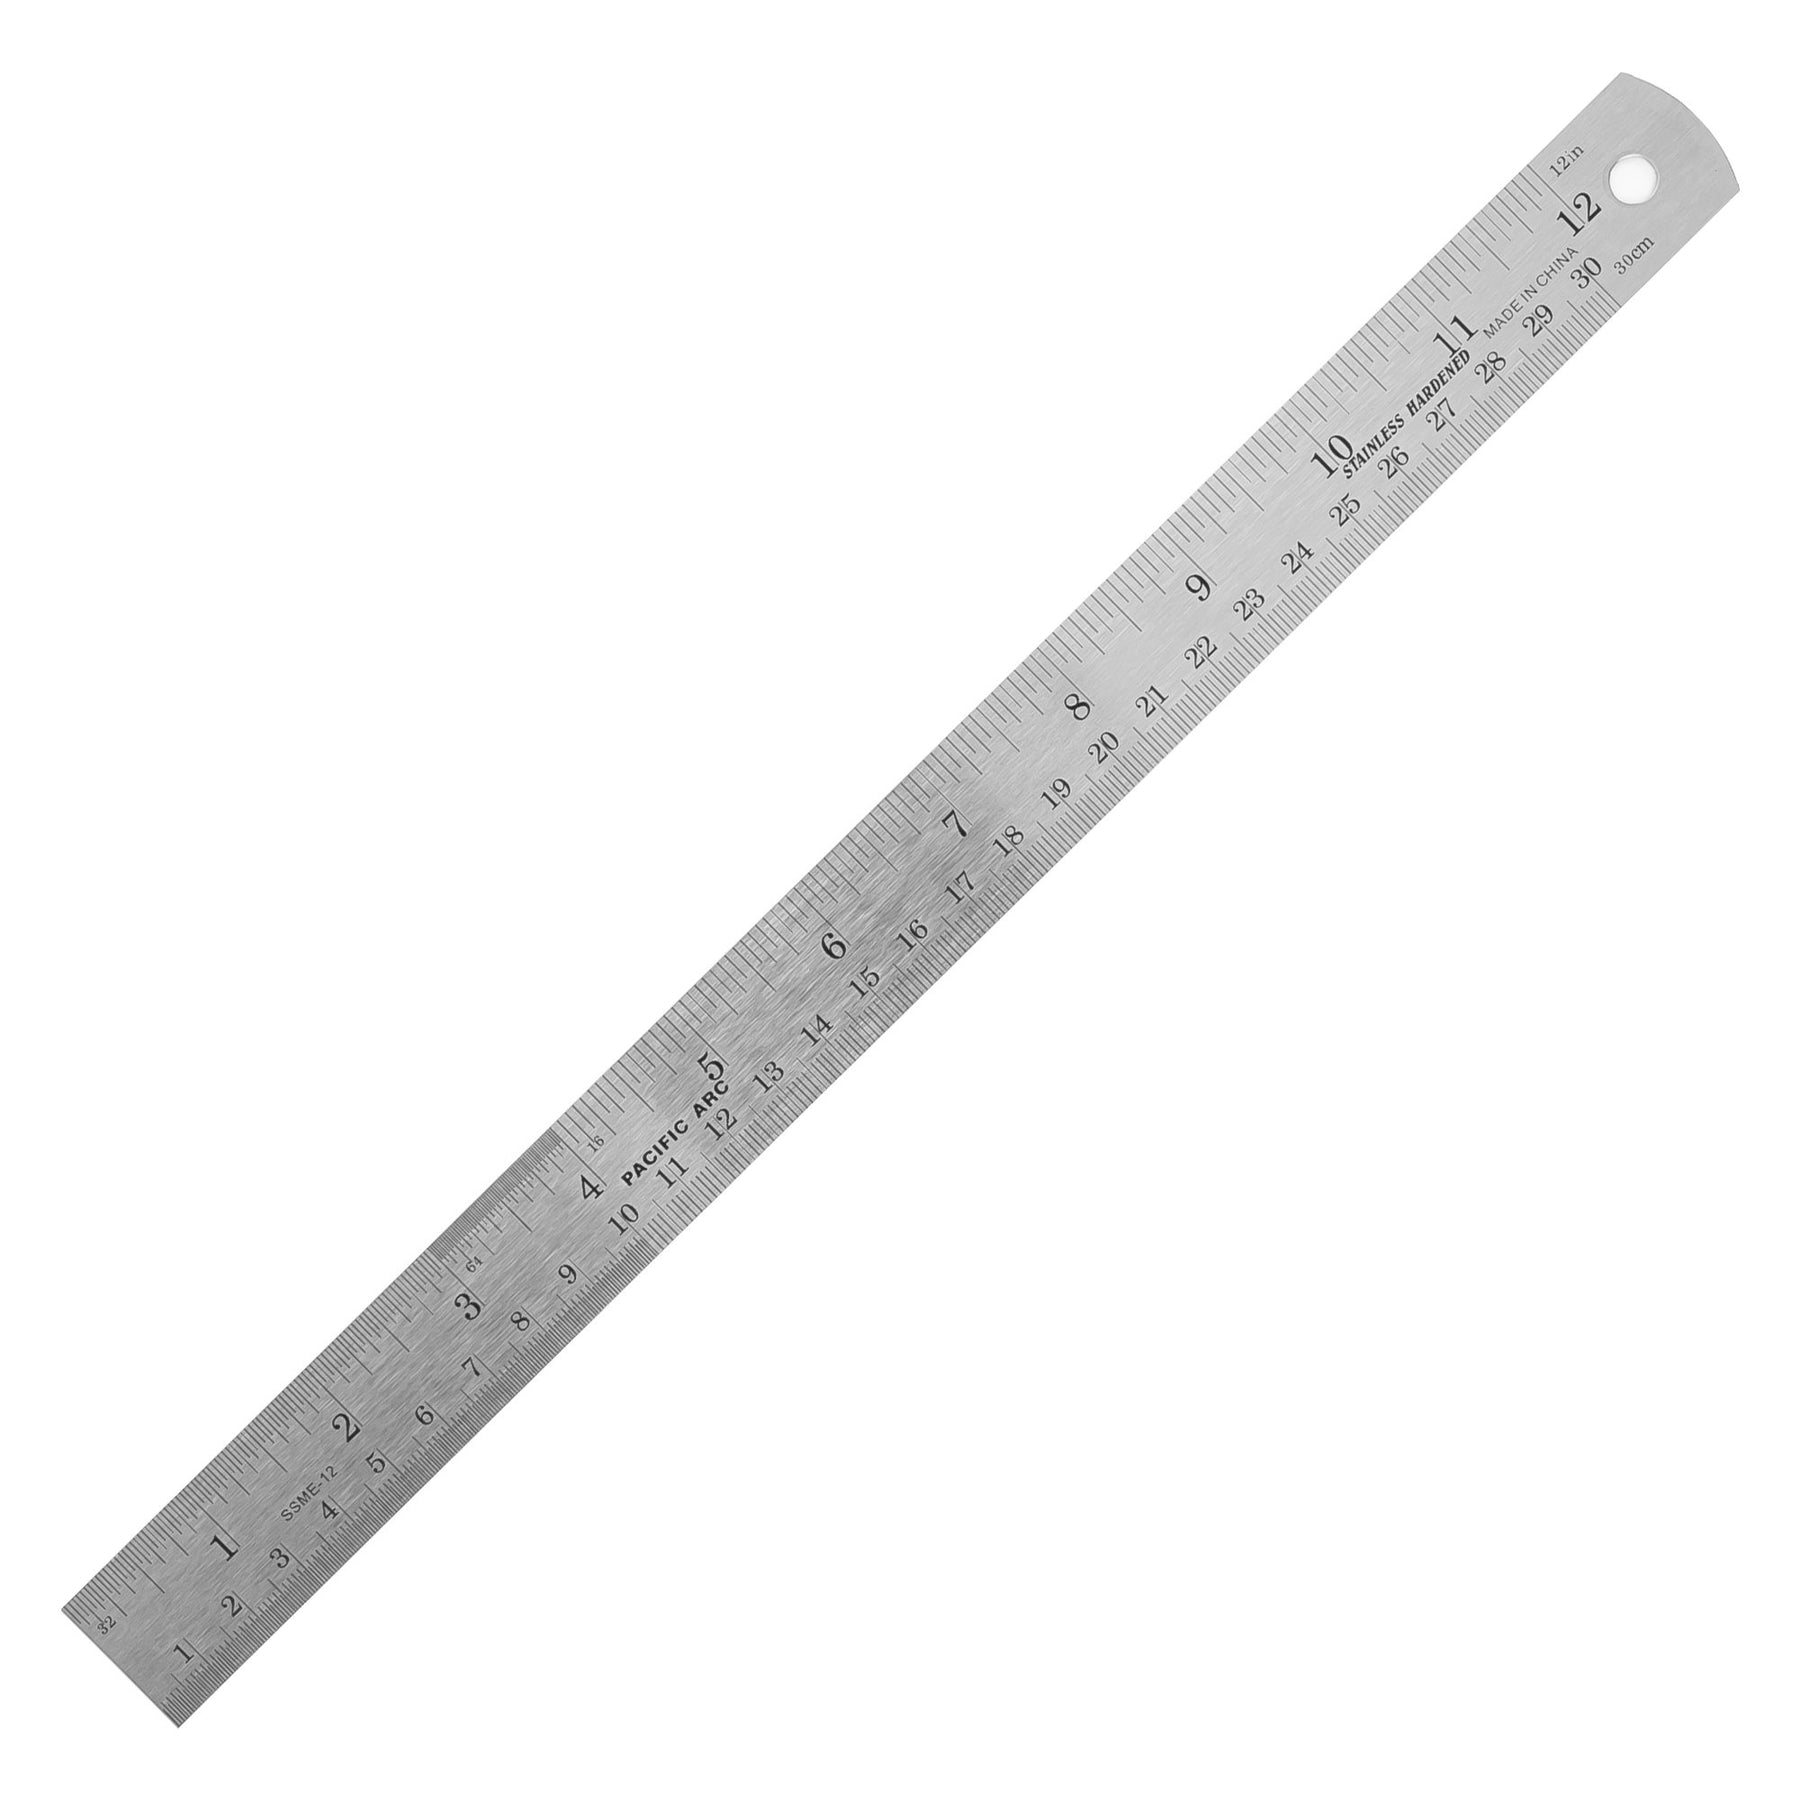 Pacific Arc, Stainless Steel Ruler with Inch/Metric Conversion Table